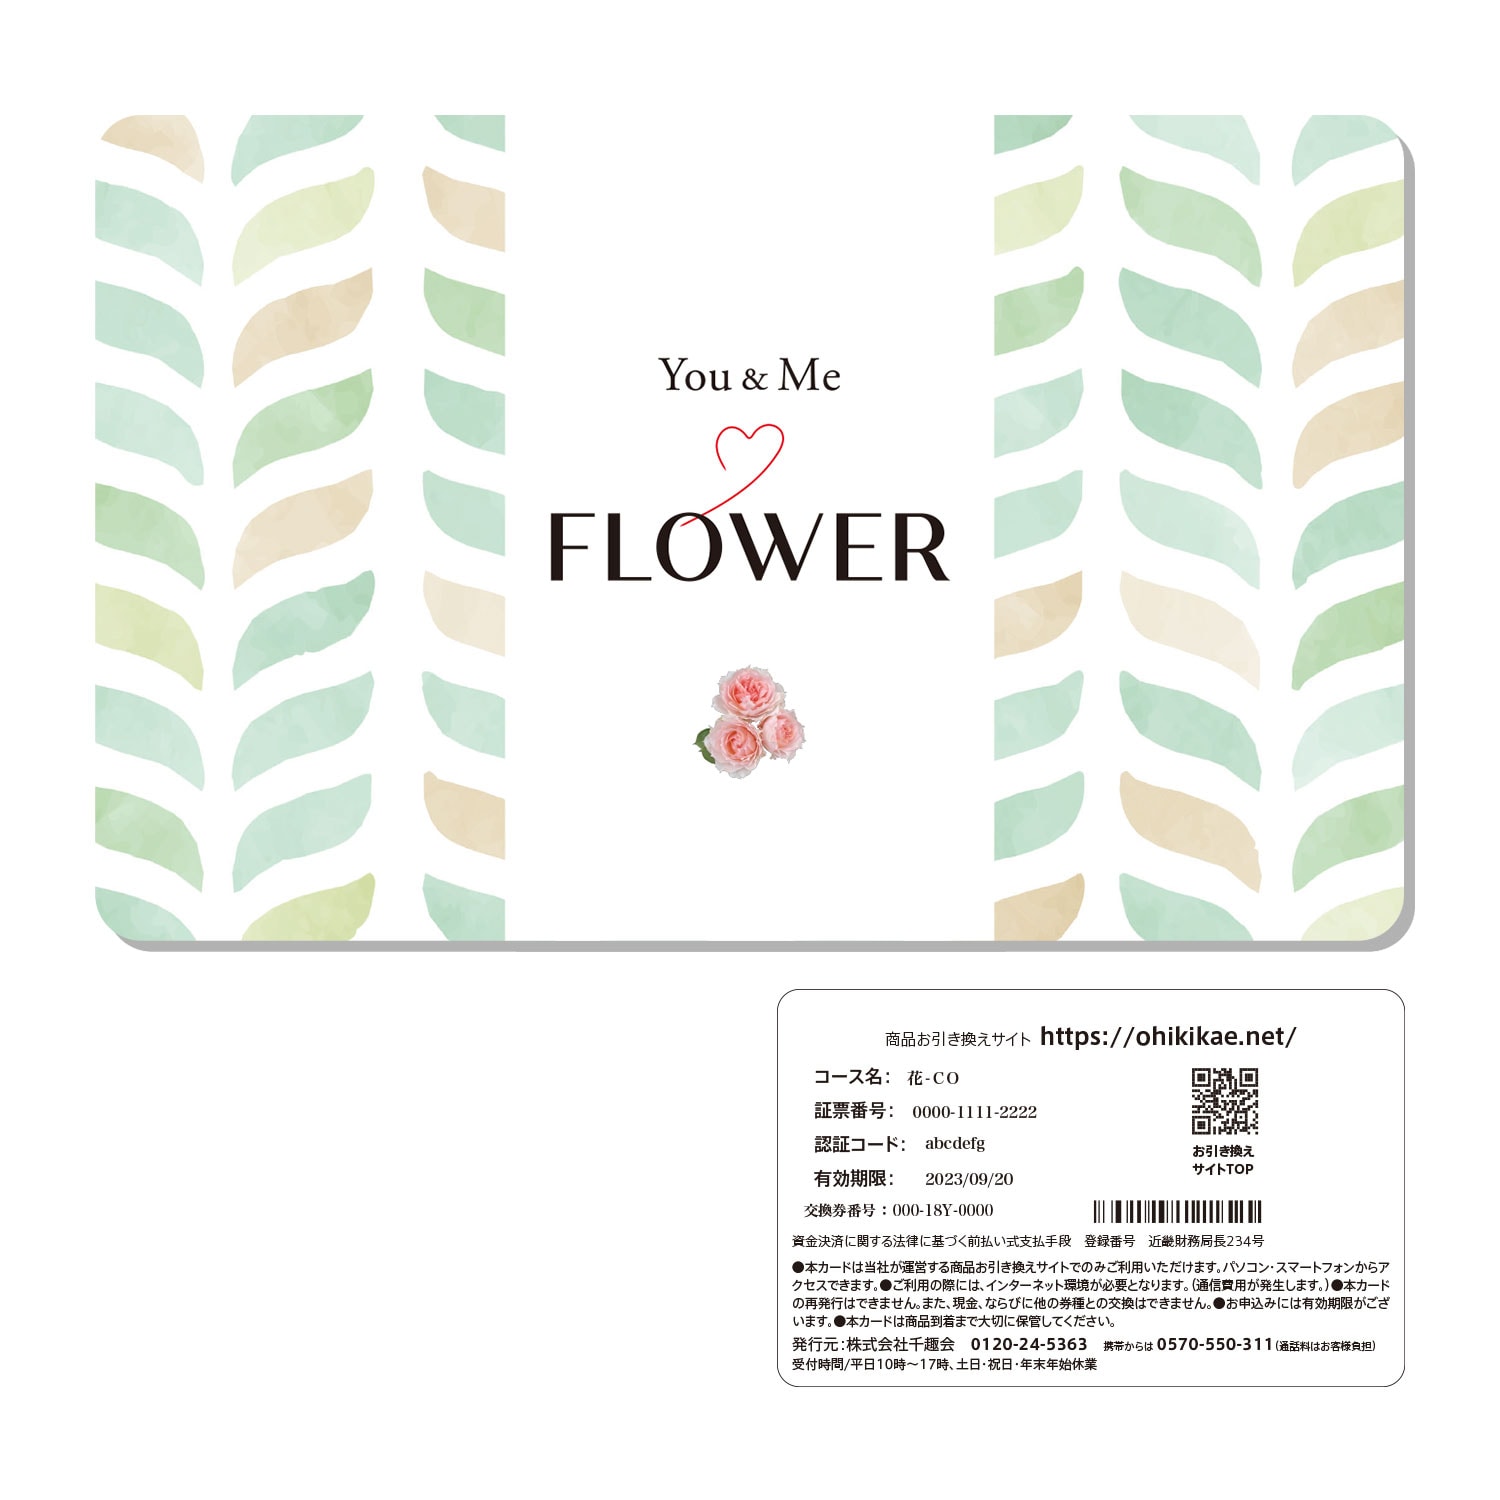 【You&Me】【送料無料】【カードギフト】花を愛するひとに お花ギフトカード「You&Me FLOWER」＜ＡＯＯ＞ - -,-